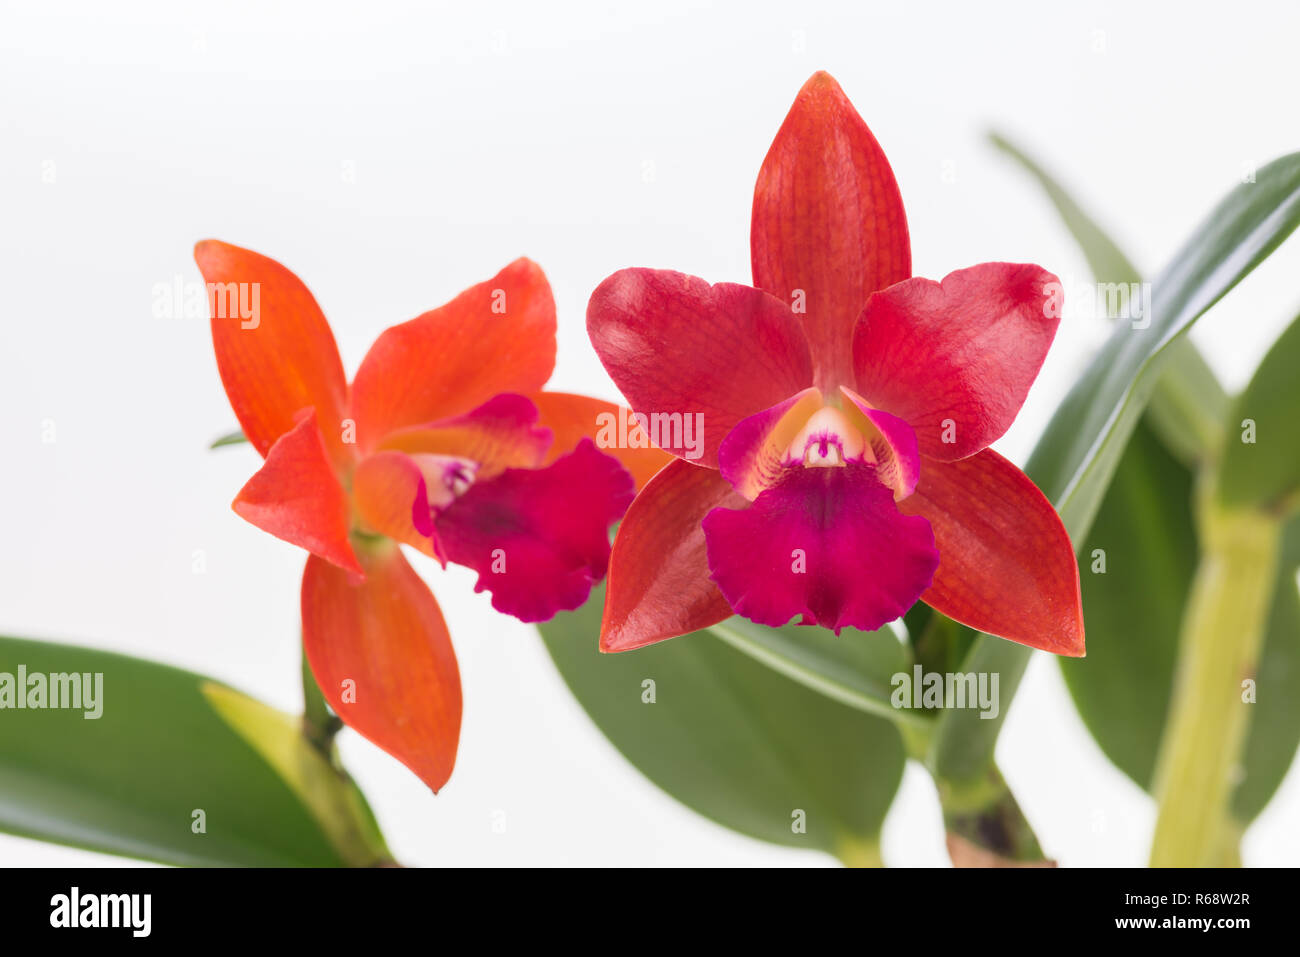 Cattleya orchids over white background Stock Photo